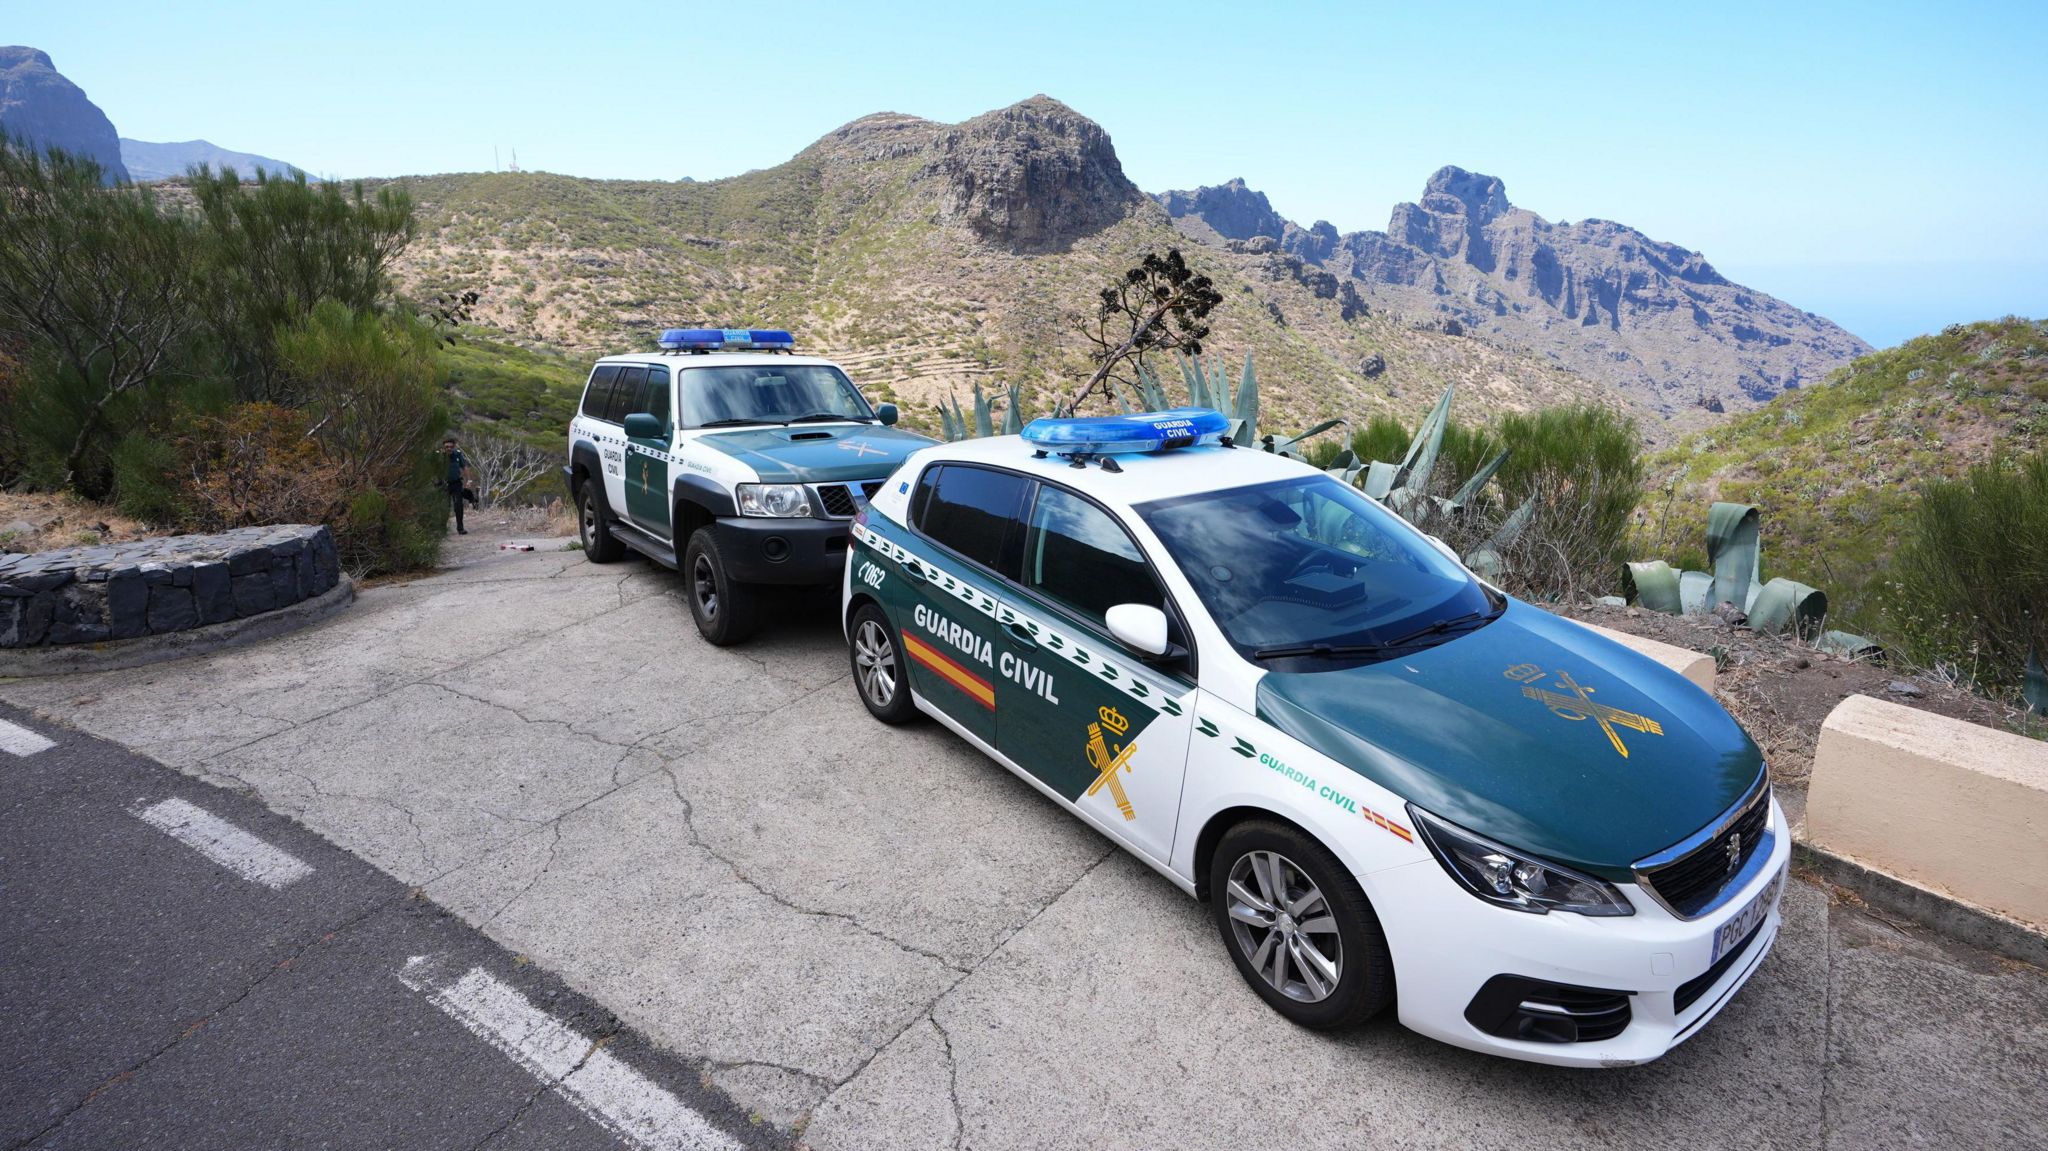 Guardia Civil cars in the mountains where Jay Slater went missing in Tenerife